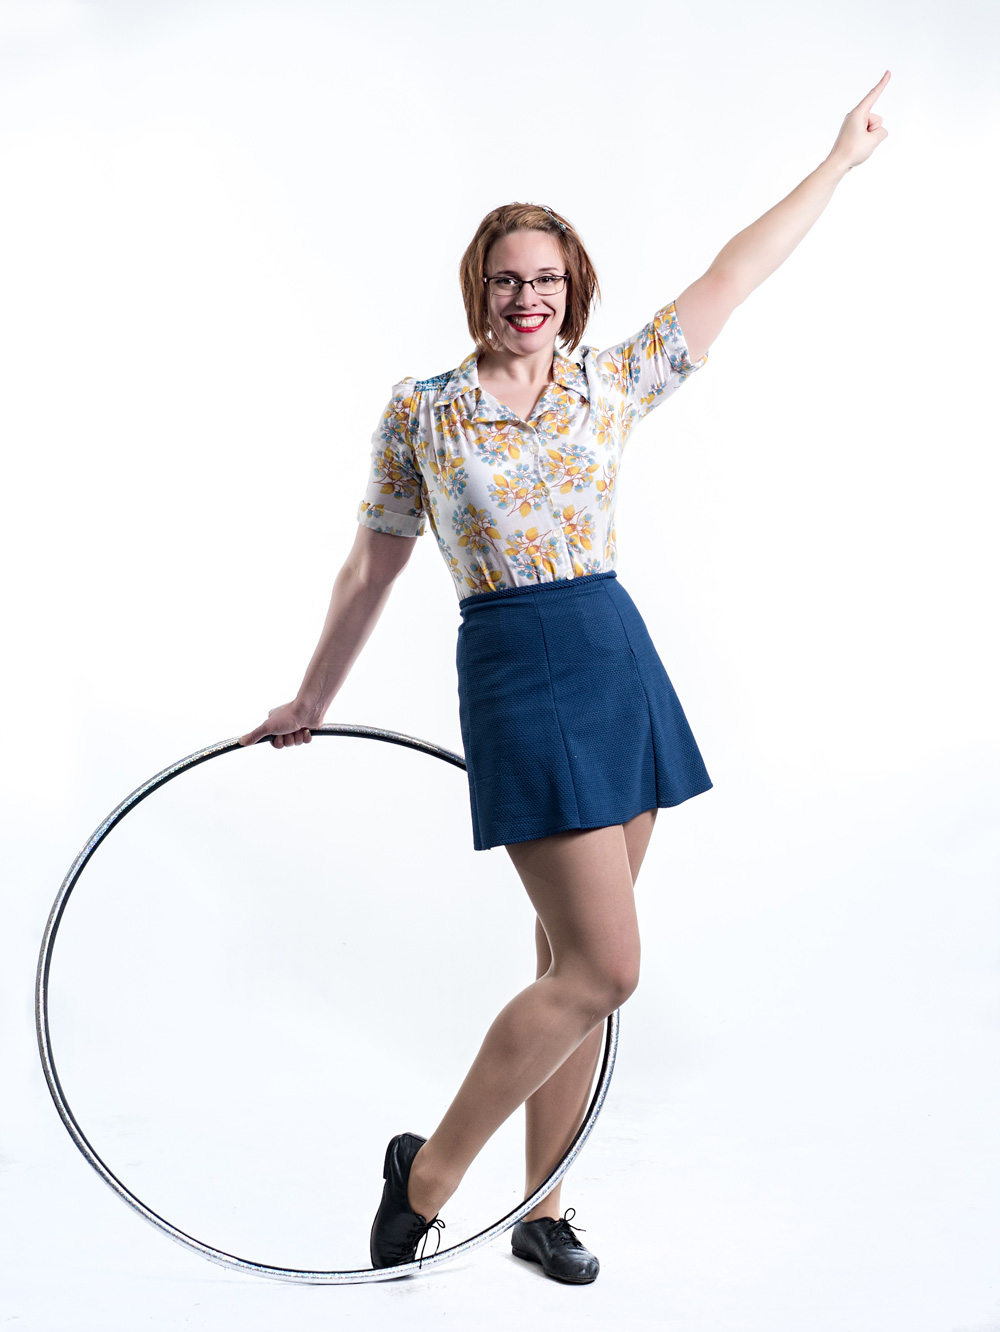 Entertainment services: comedy hula hoop act